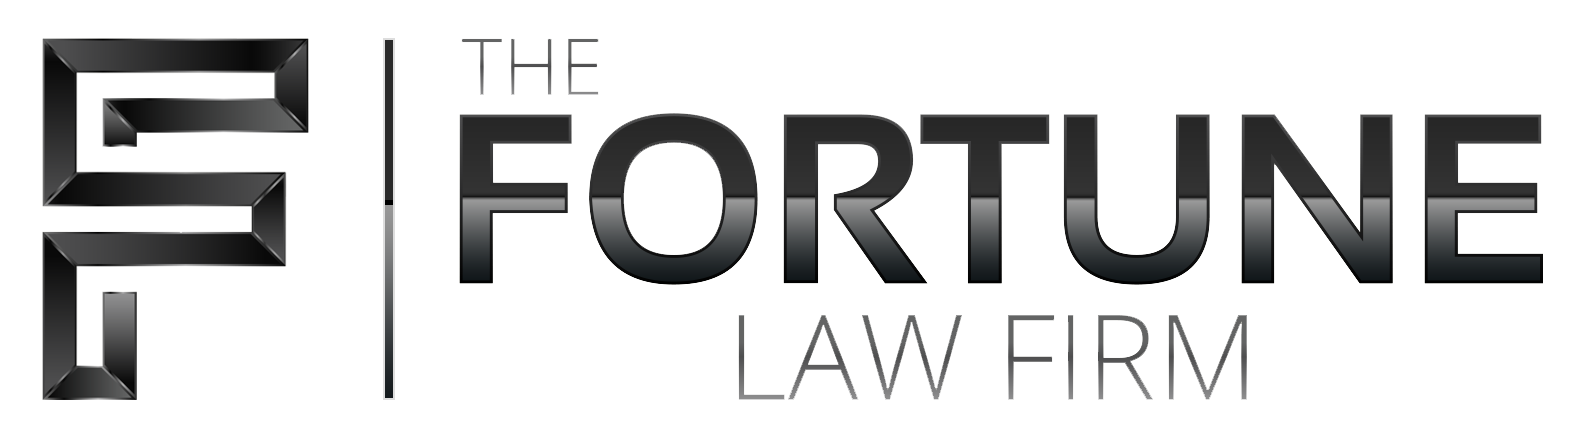 The Fortune Law Firm Logo